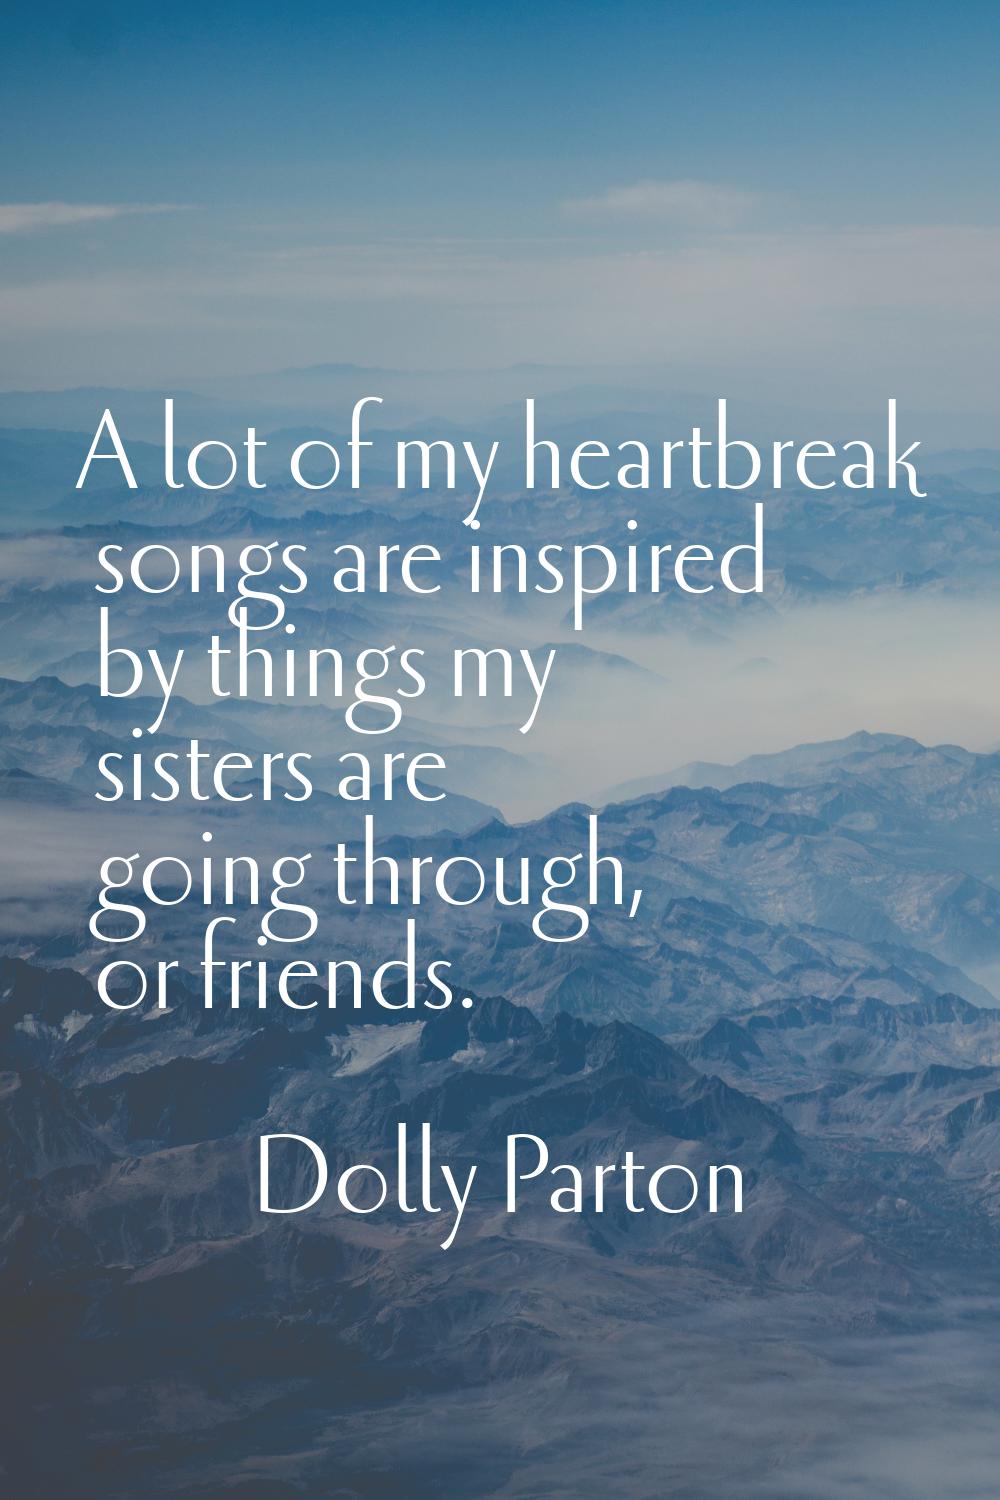 A lot of my heartbreak songs are inspired by things my sisters are going through, or friends.